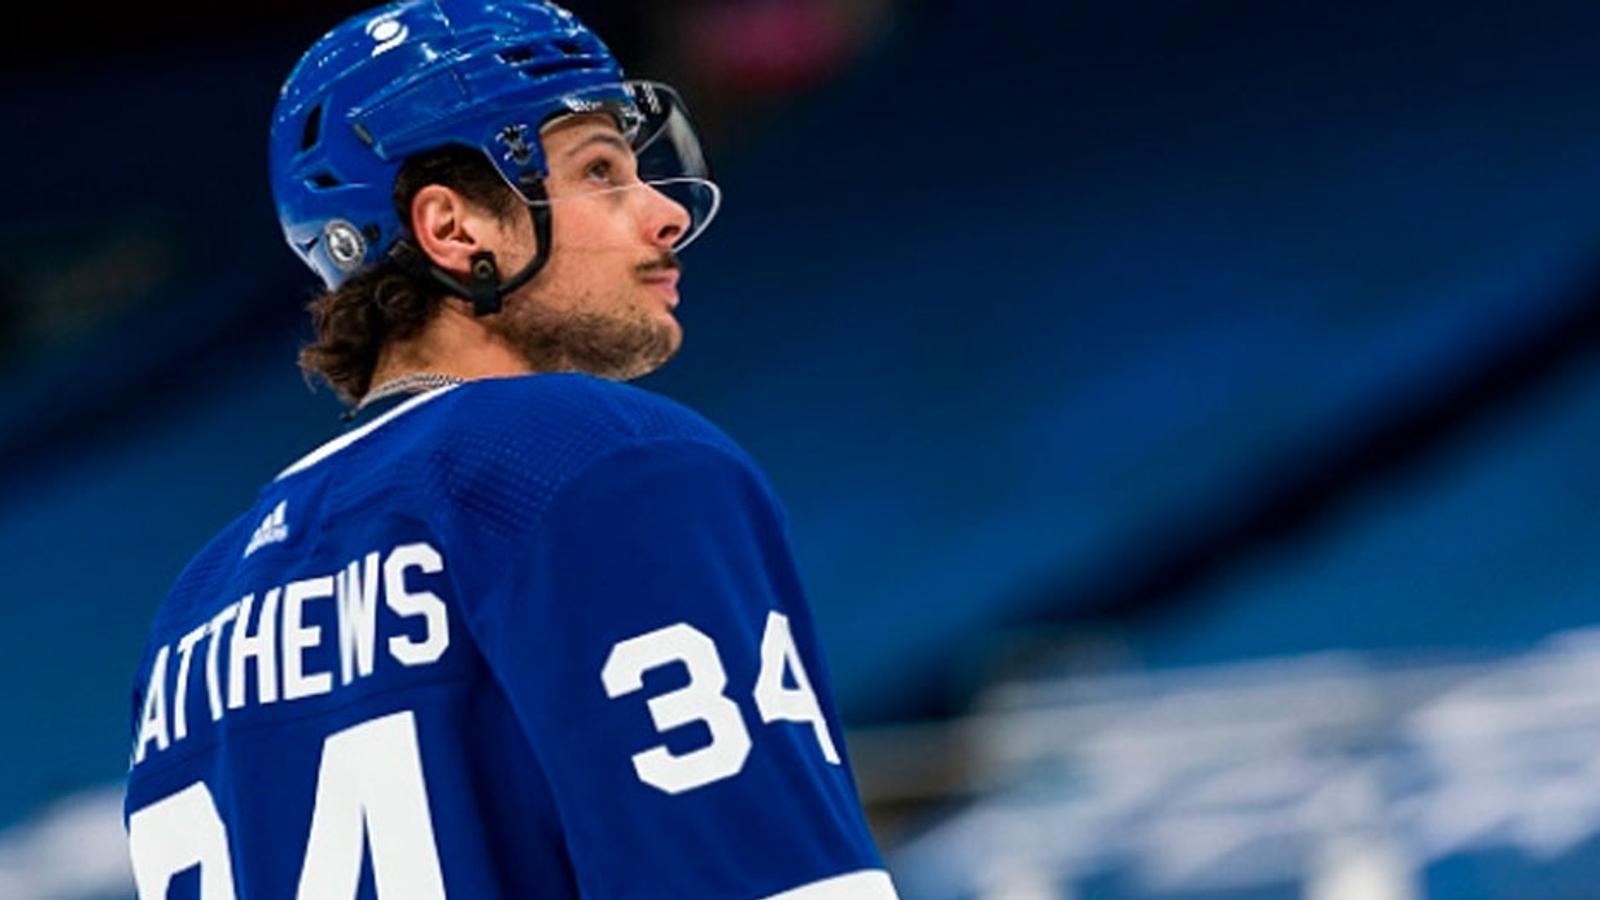 Report: Big news coming from Auston Matthews today